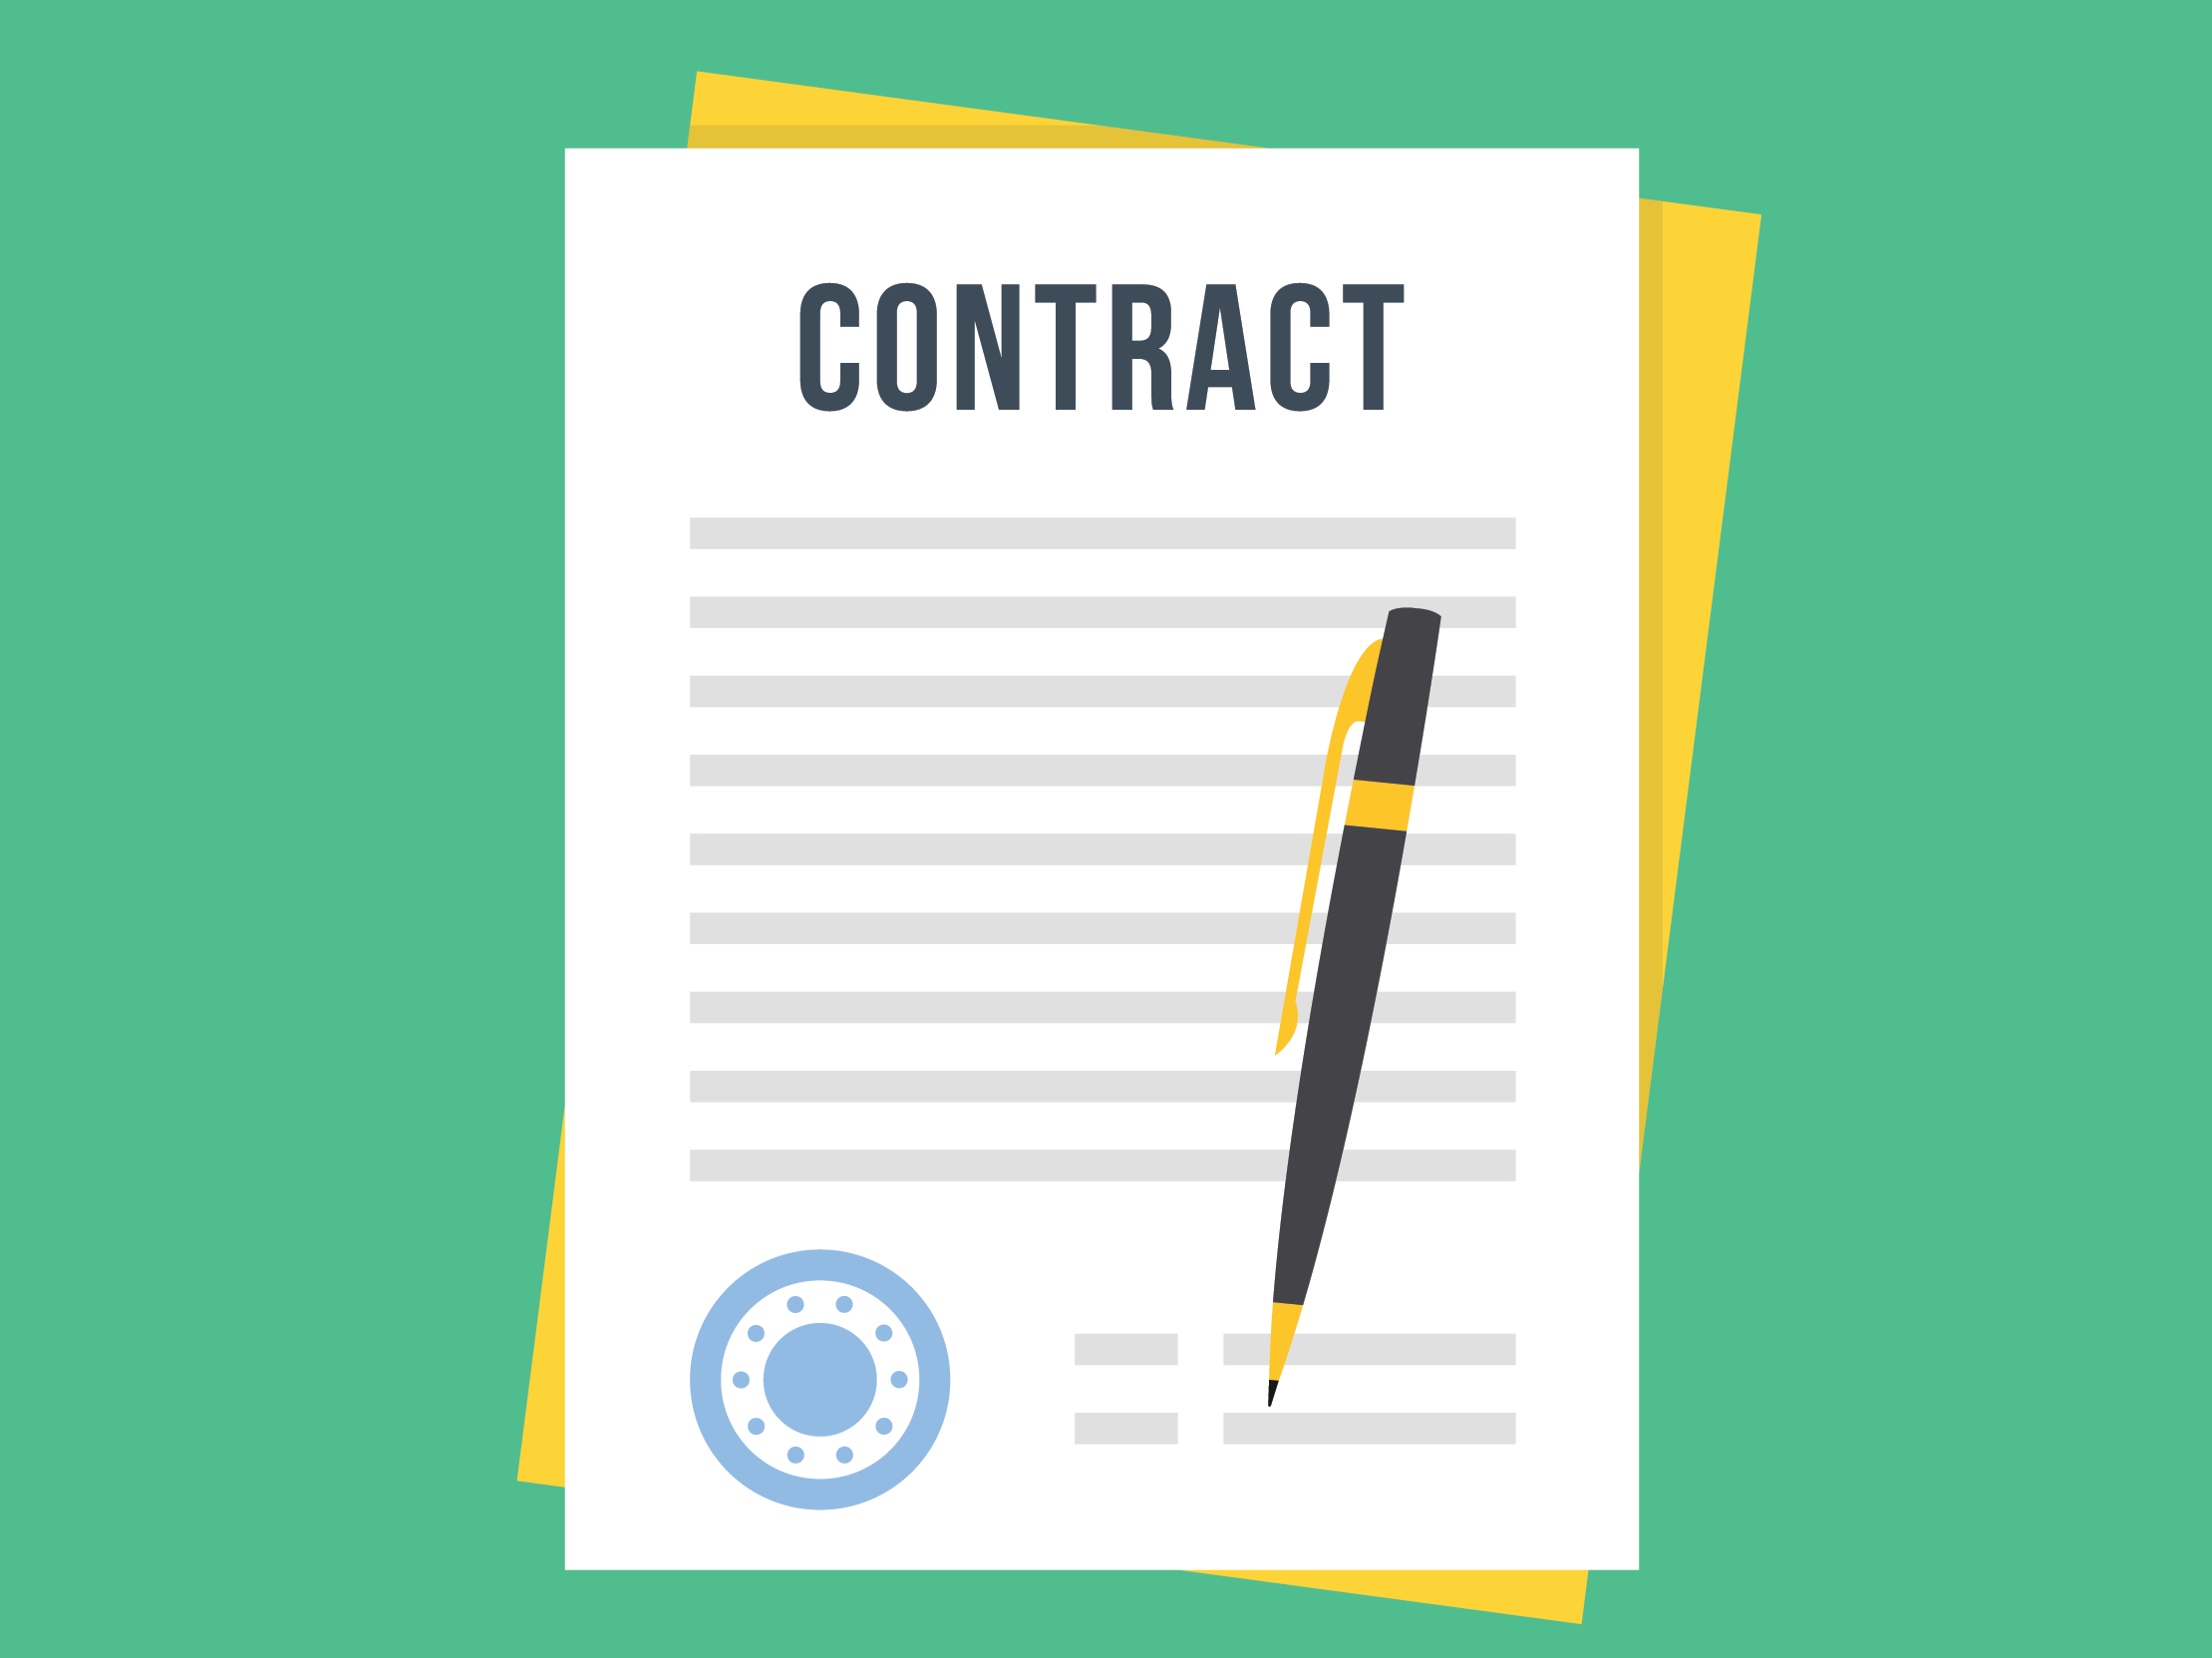 Preparing a contract summary that adds value for your board